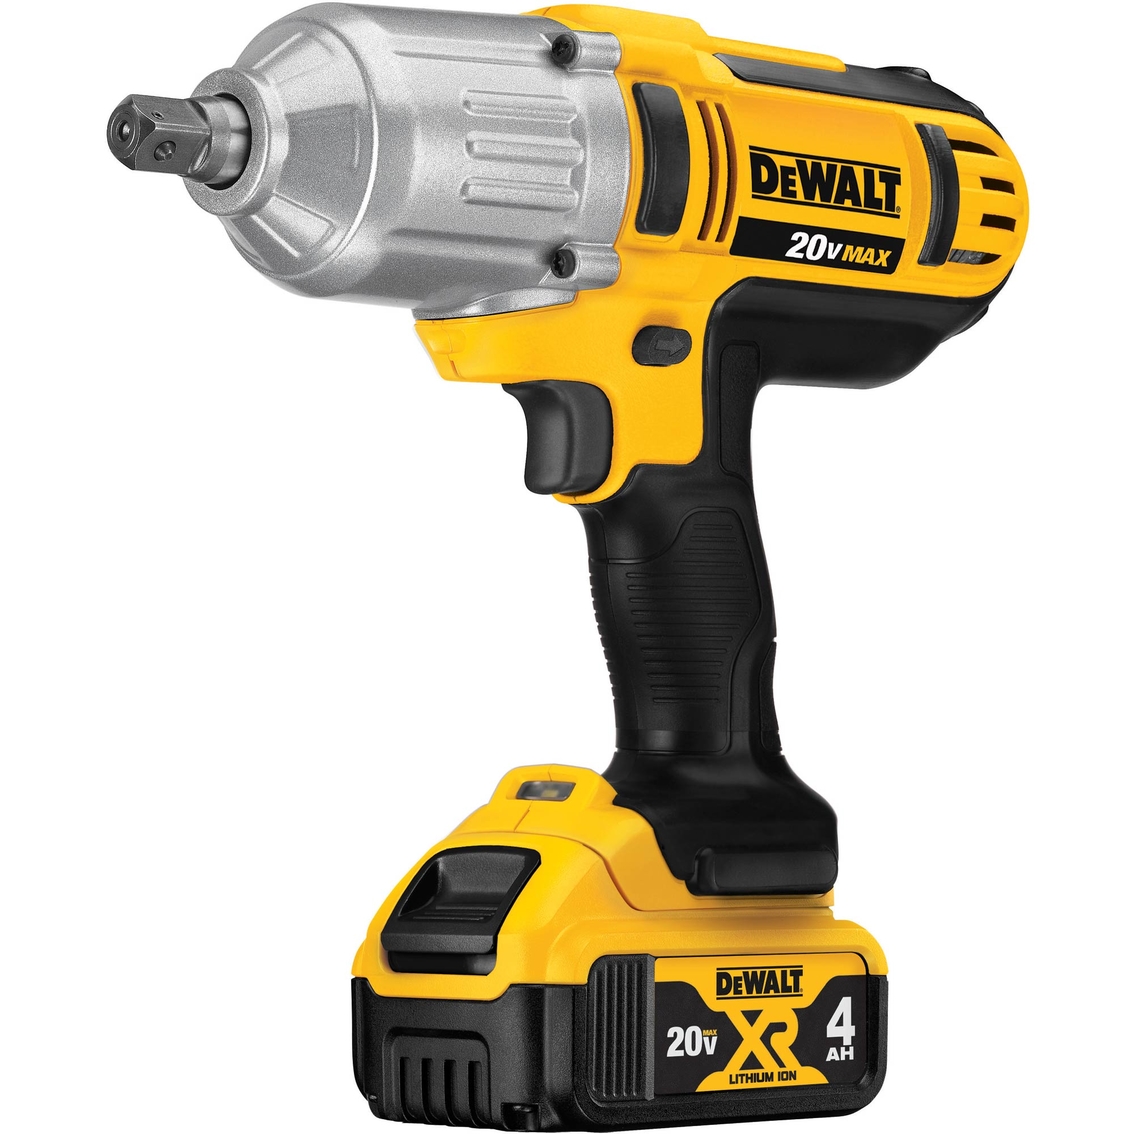 DeWalt DCF889M2 20V MAX* 1/2 In. High Torque Impact Wrench Kit - Image 2 of 9